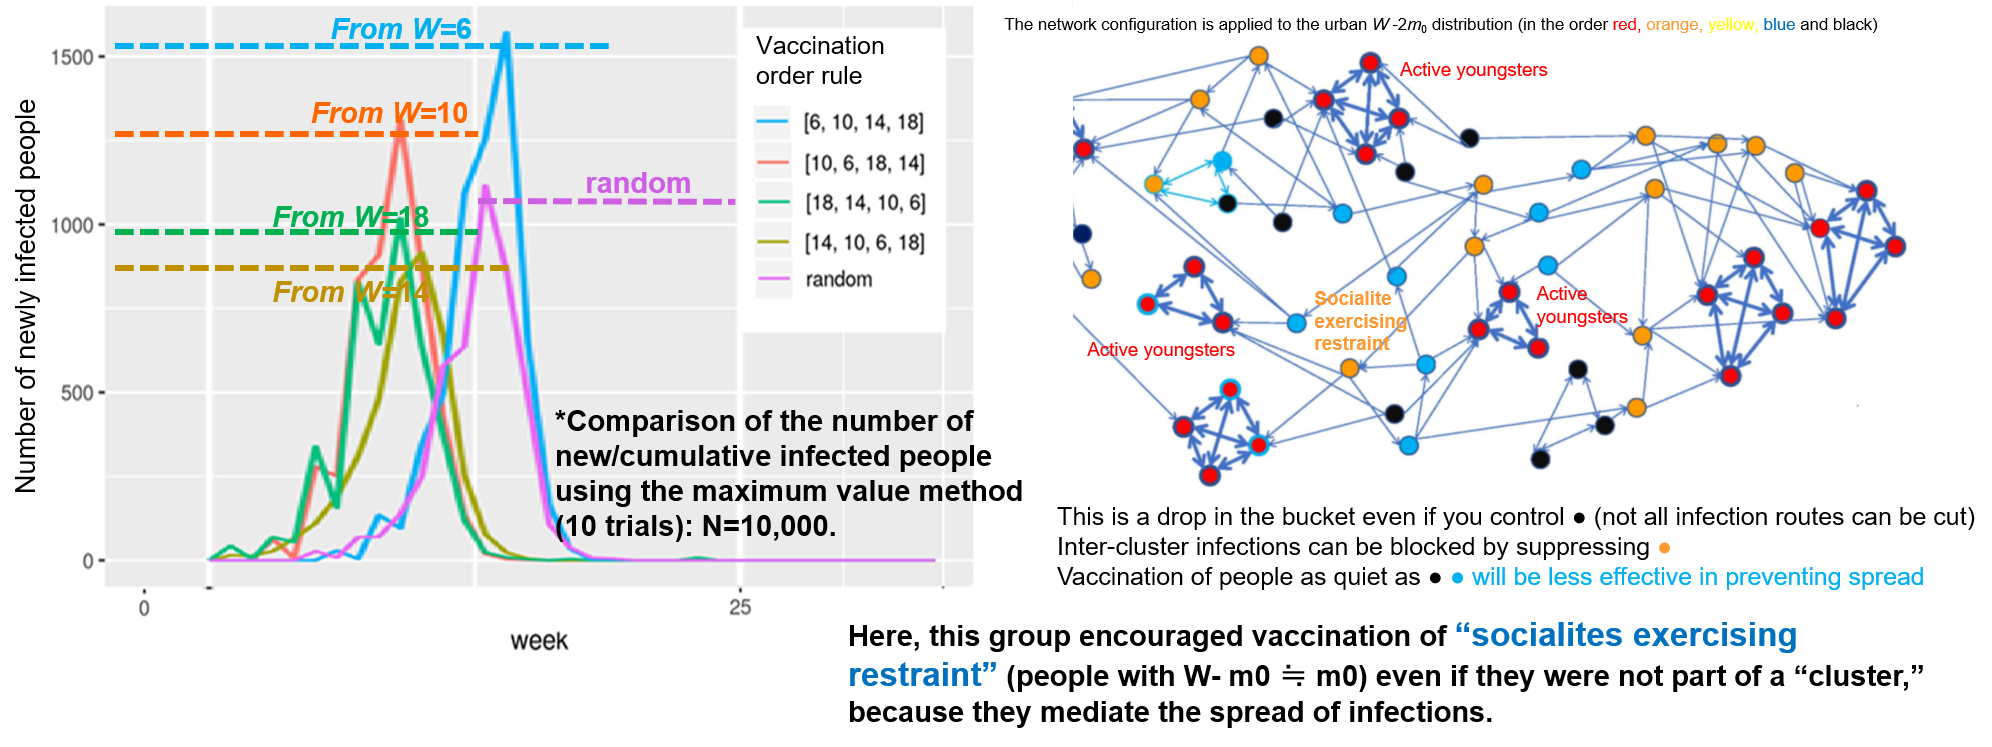 ♦ Reference ♦ Suggestions for Vaccination Planning in the Distribution of Urban Human Interaction